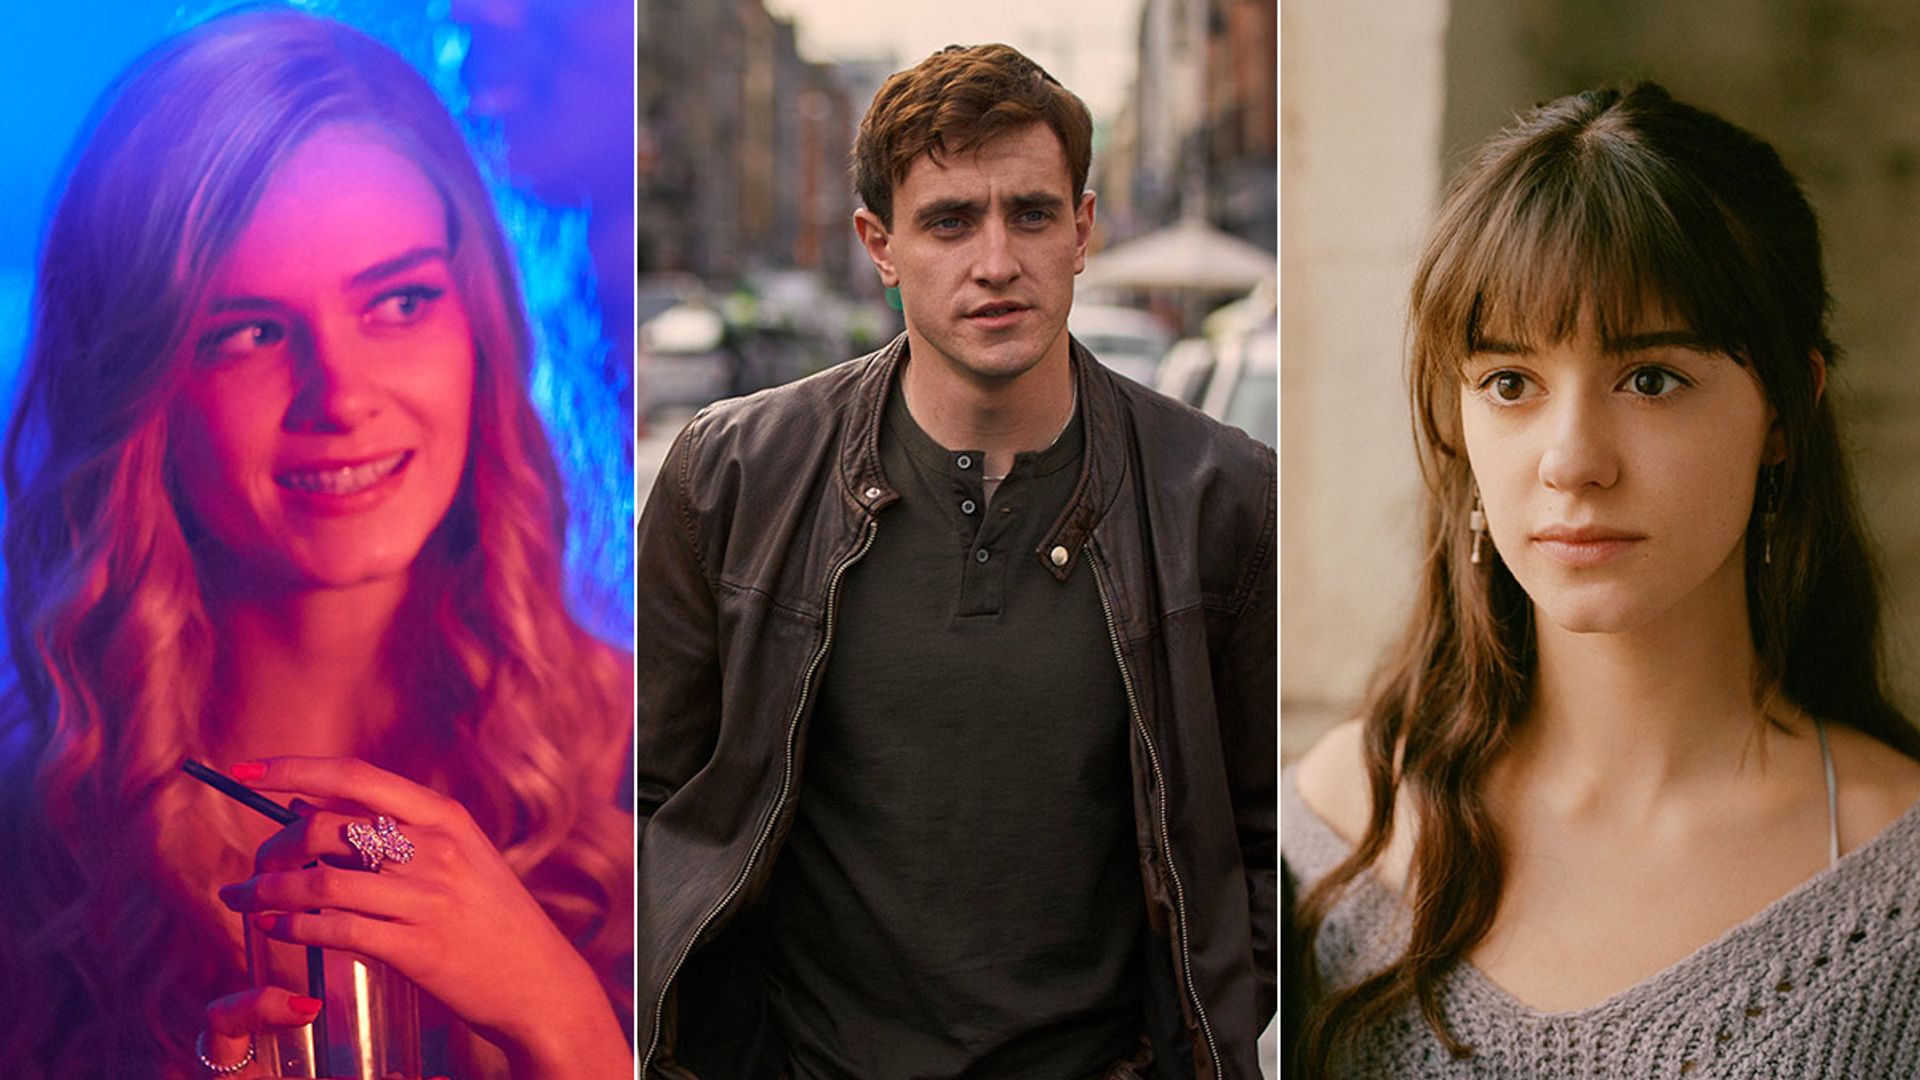 The cast of Normal People: who's single and who's in a relationship?